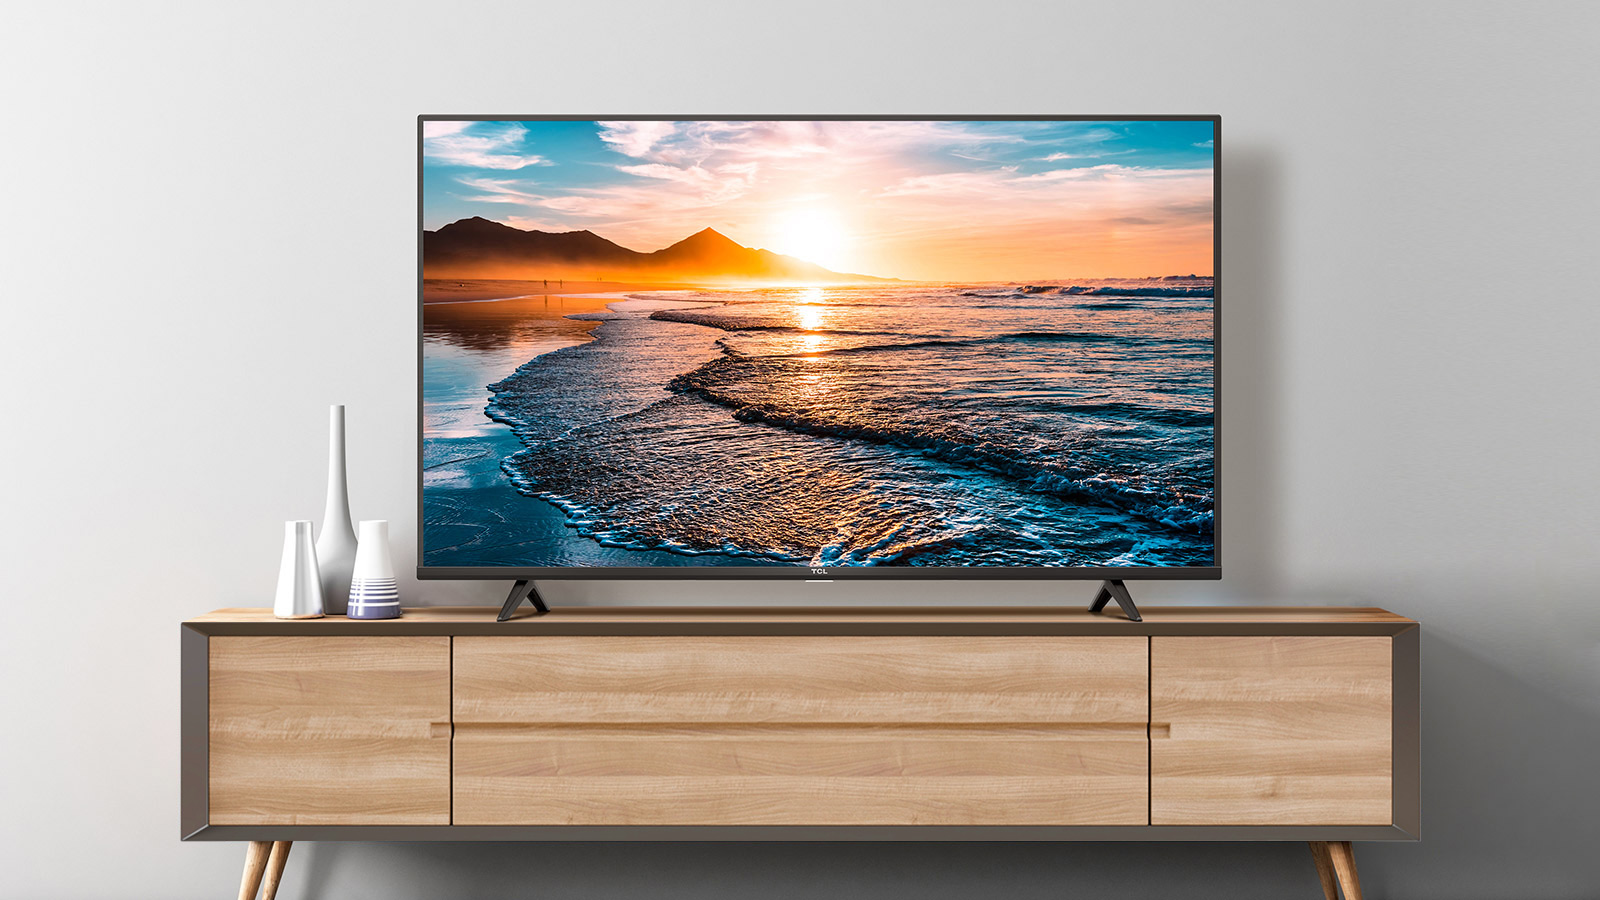 TCL P615 Series 4K Android TV